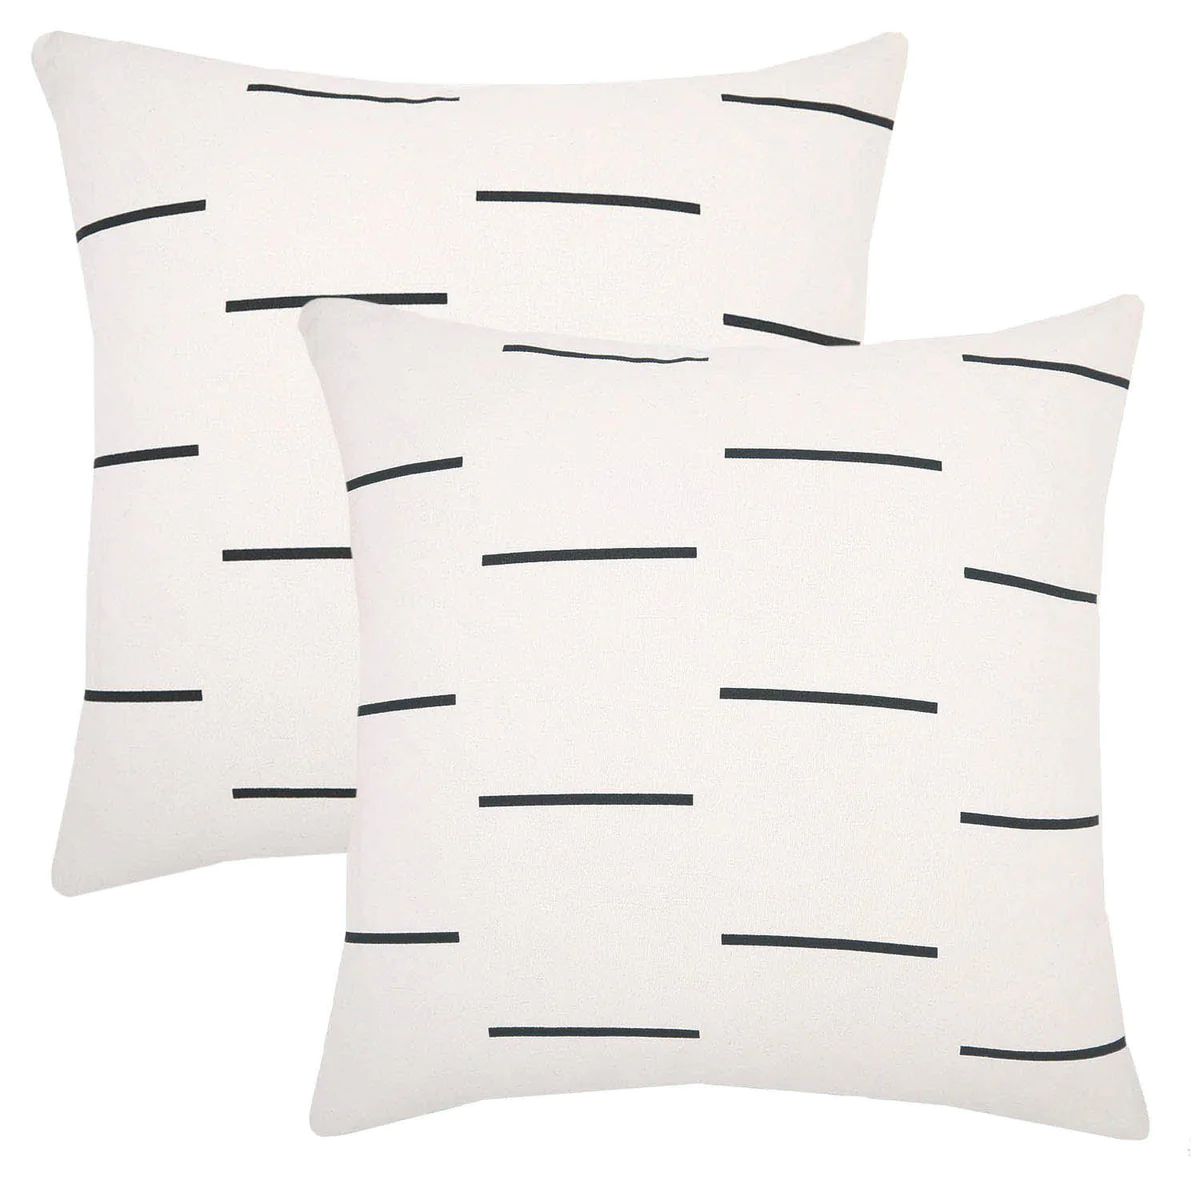 Omi - 2 Pack Pillow Covers - 20" | Woven Nook